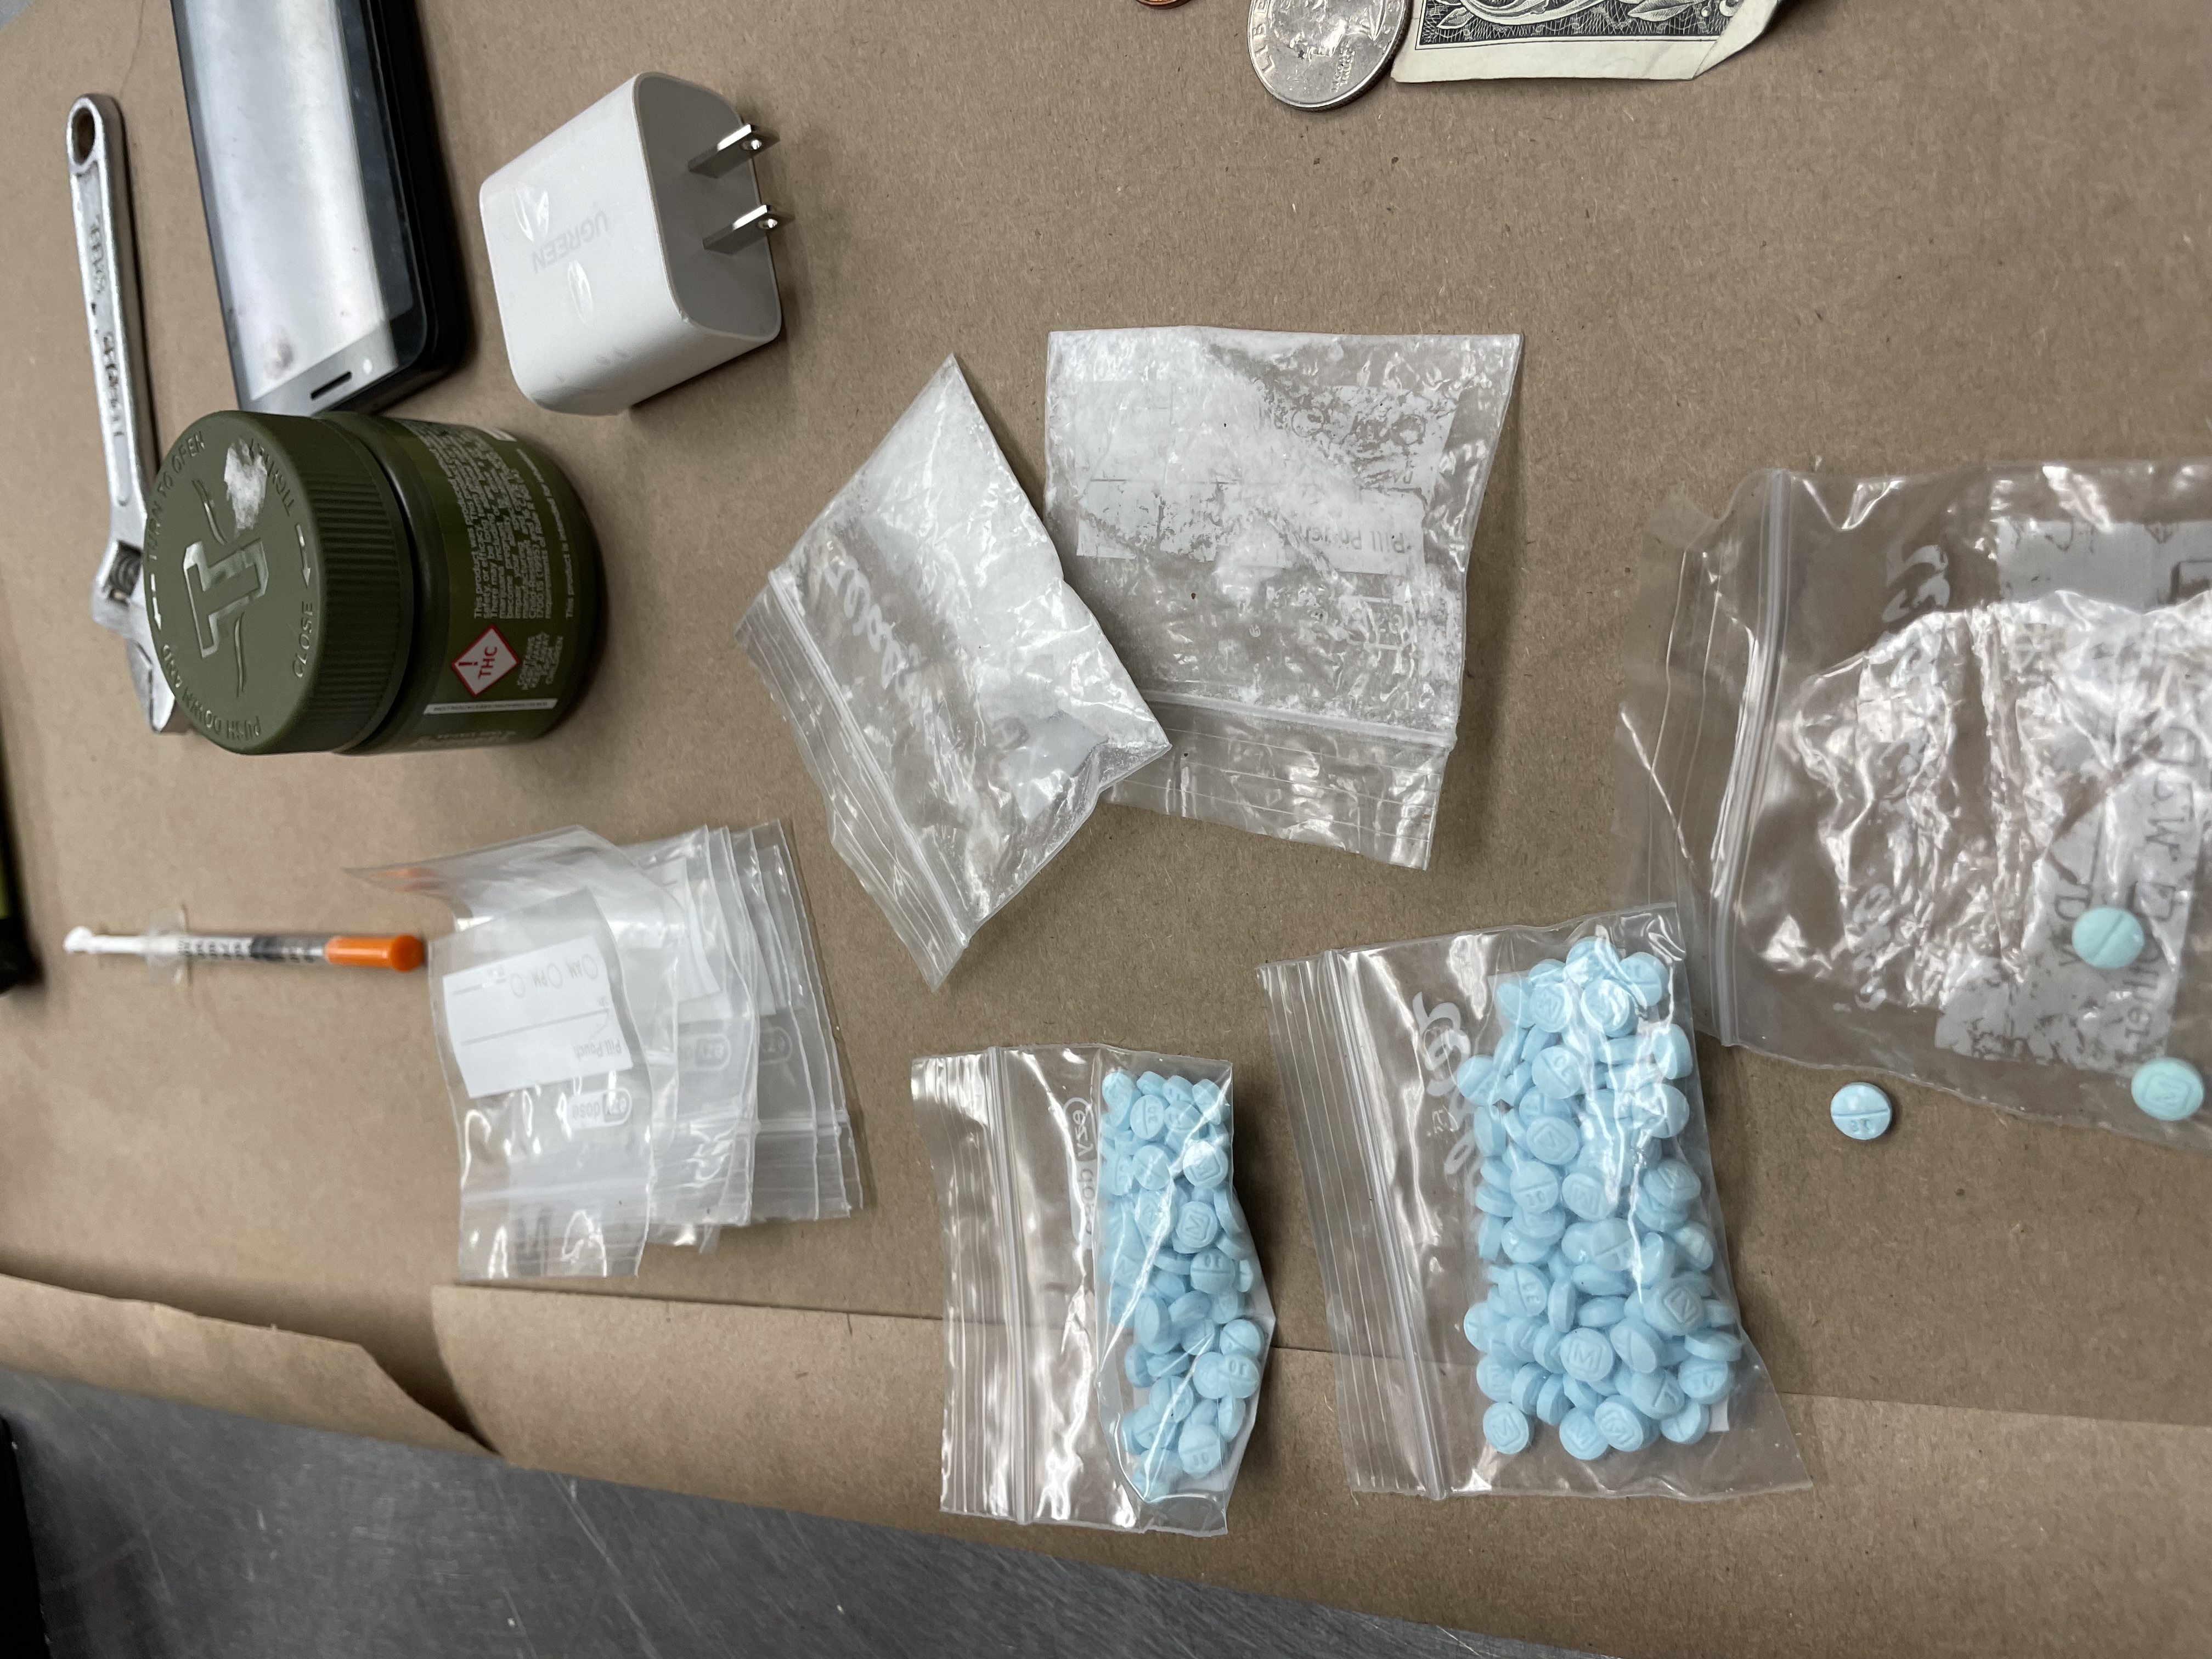 Recovered Drugs